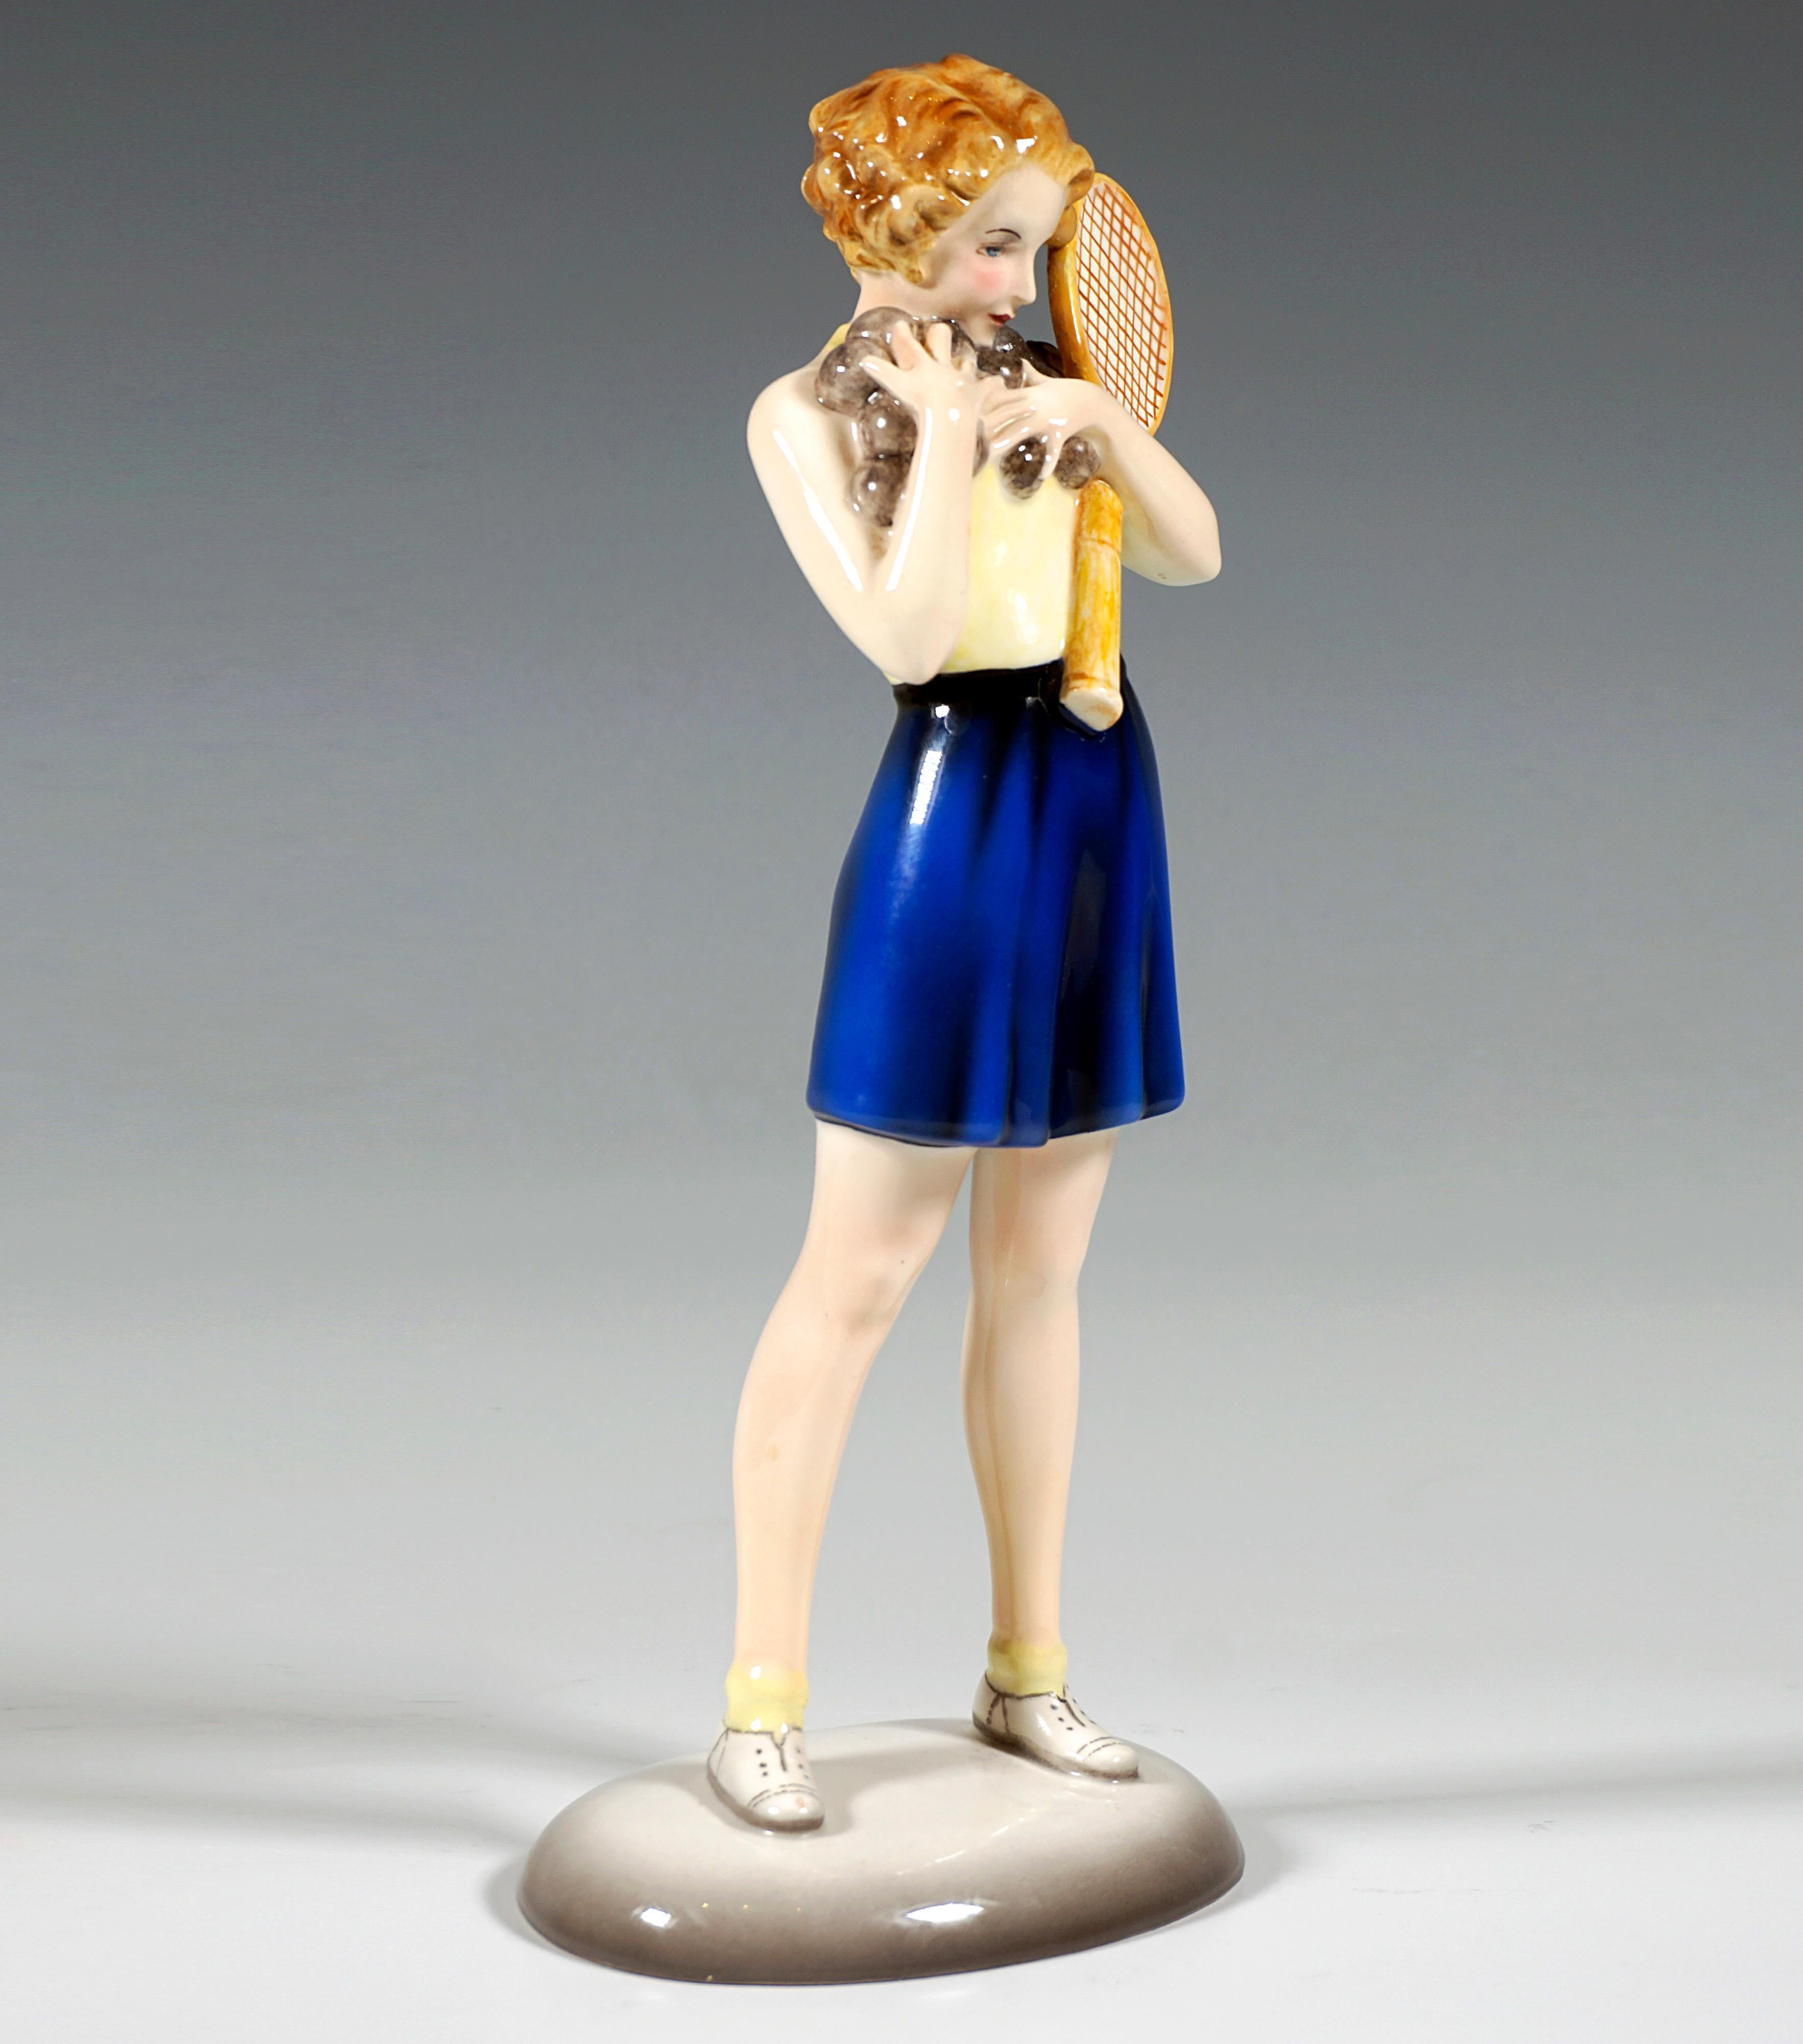 Very Rare Goldscheider Vienna Ceramic Figurine of the 1930s:
Young girl in tennis clothes: backless light-colored top, dark blue, wide, short pants and white tennis shoes, standing with her legs apart, holding a multitude of tennis balls with both